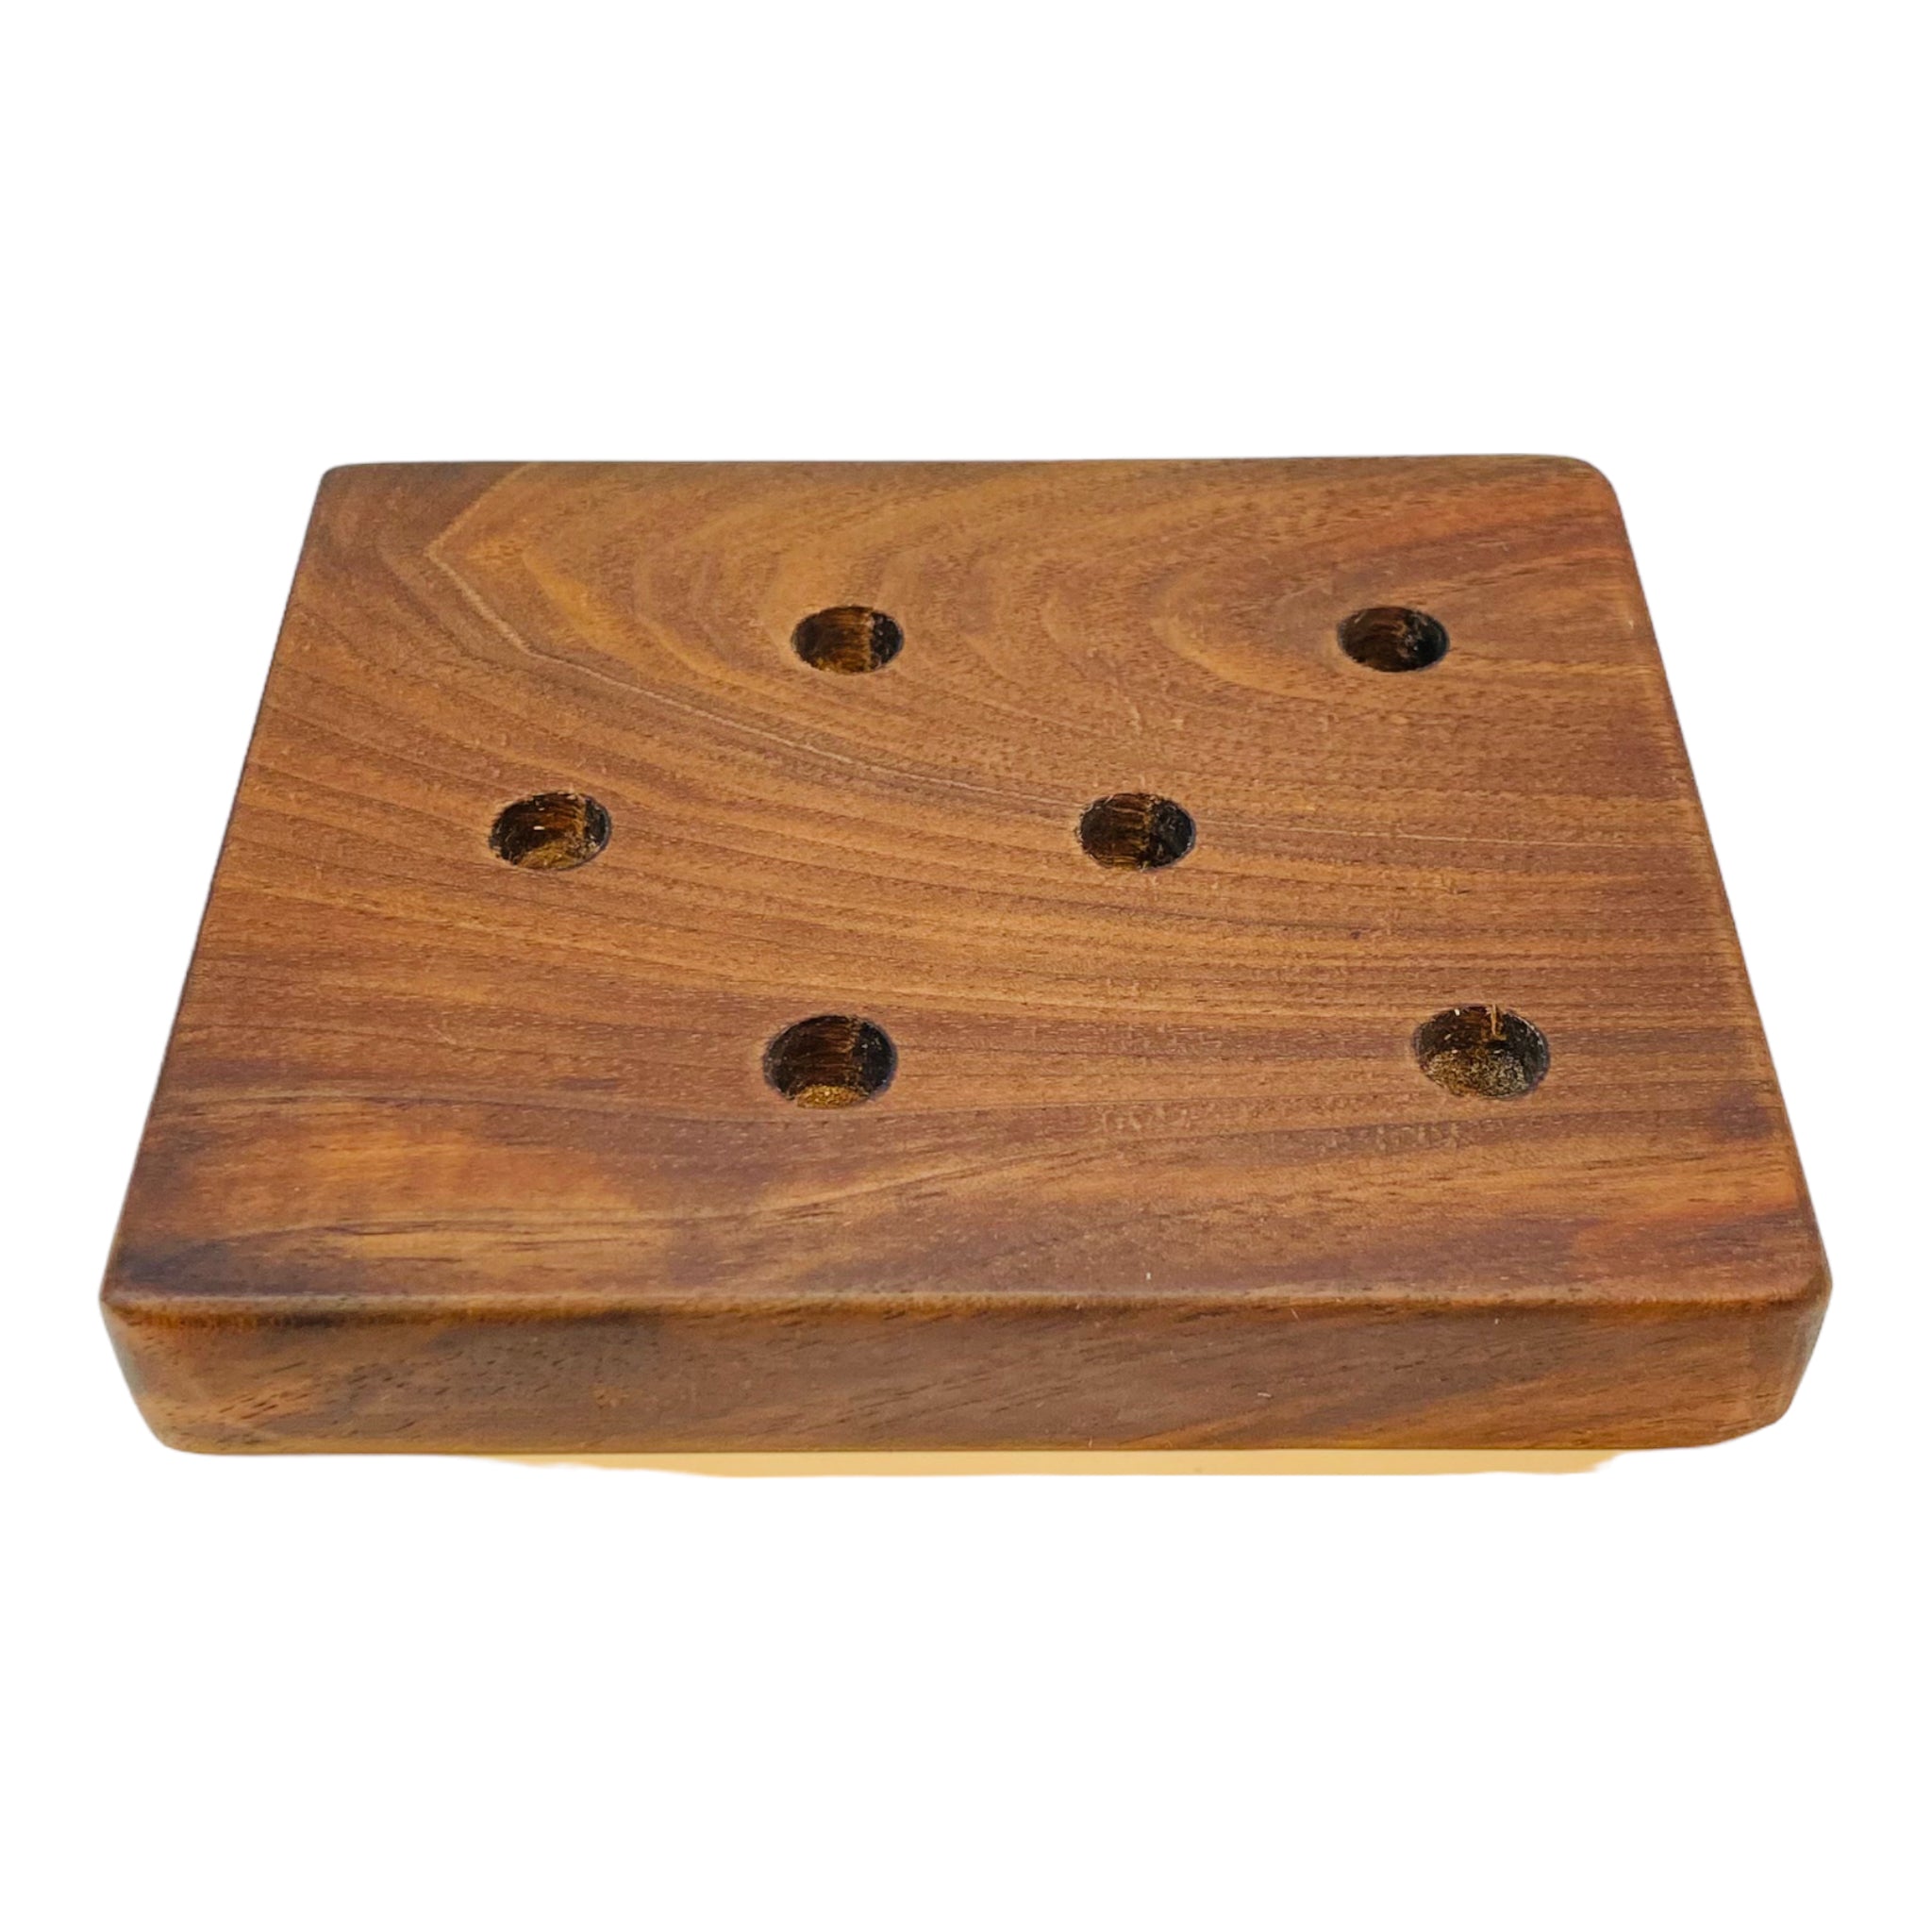 6 Hole Wood Display Stand Holder For 10mm Bong Bowl Pieces Or Quartz Bangers - Black Walnut Perfect for displaying 10mm Bong Bowl Pieces, Quartz Bangers, Carb Caps, And Marbles.